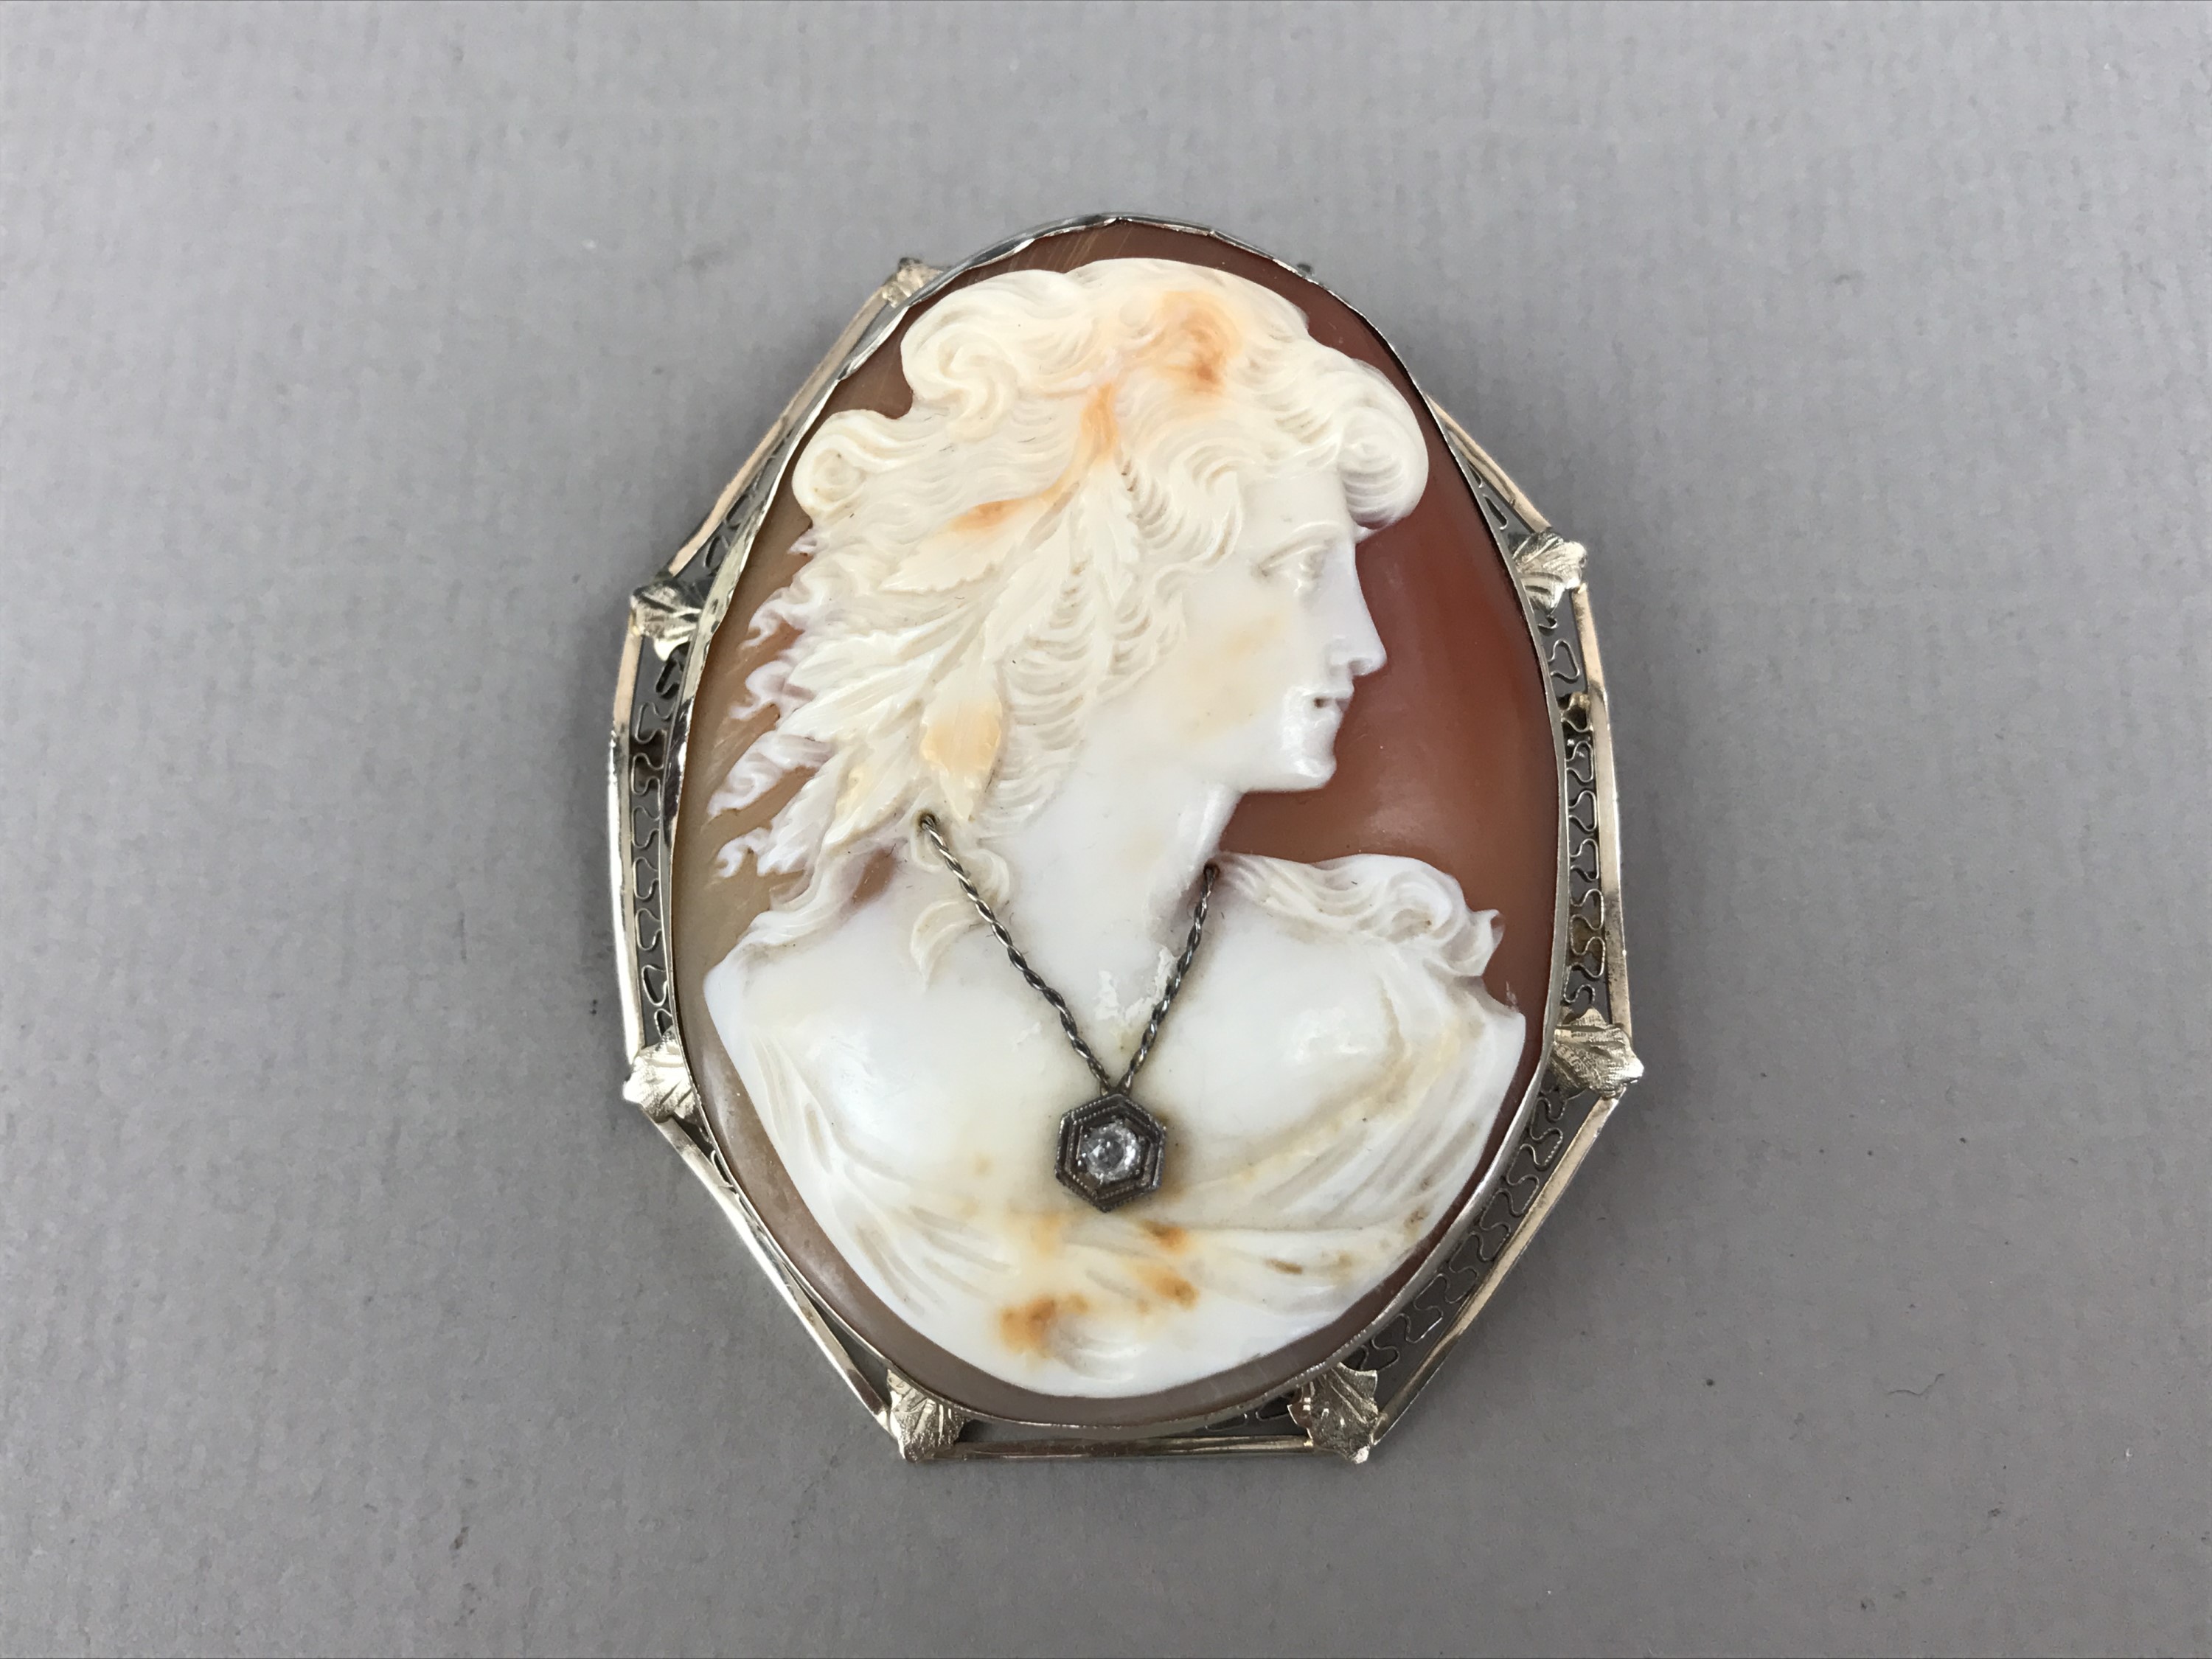 An Edwardian diamond and carved cameo brooch, bearing the profile of a young maiden with flowing